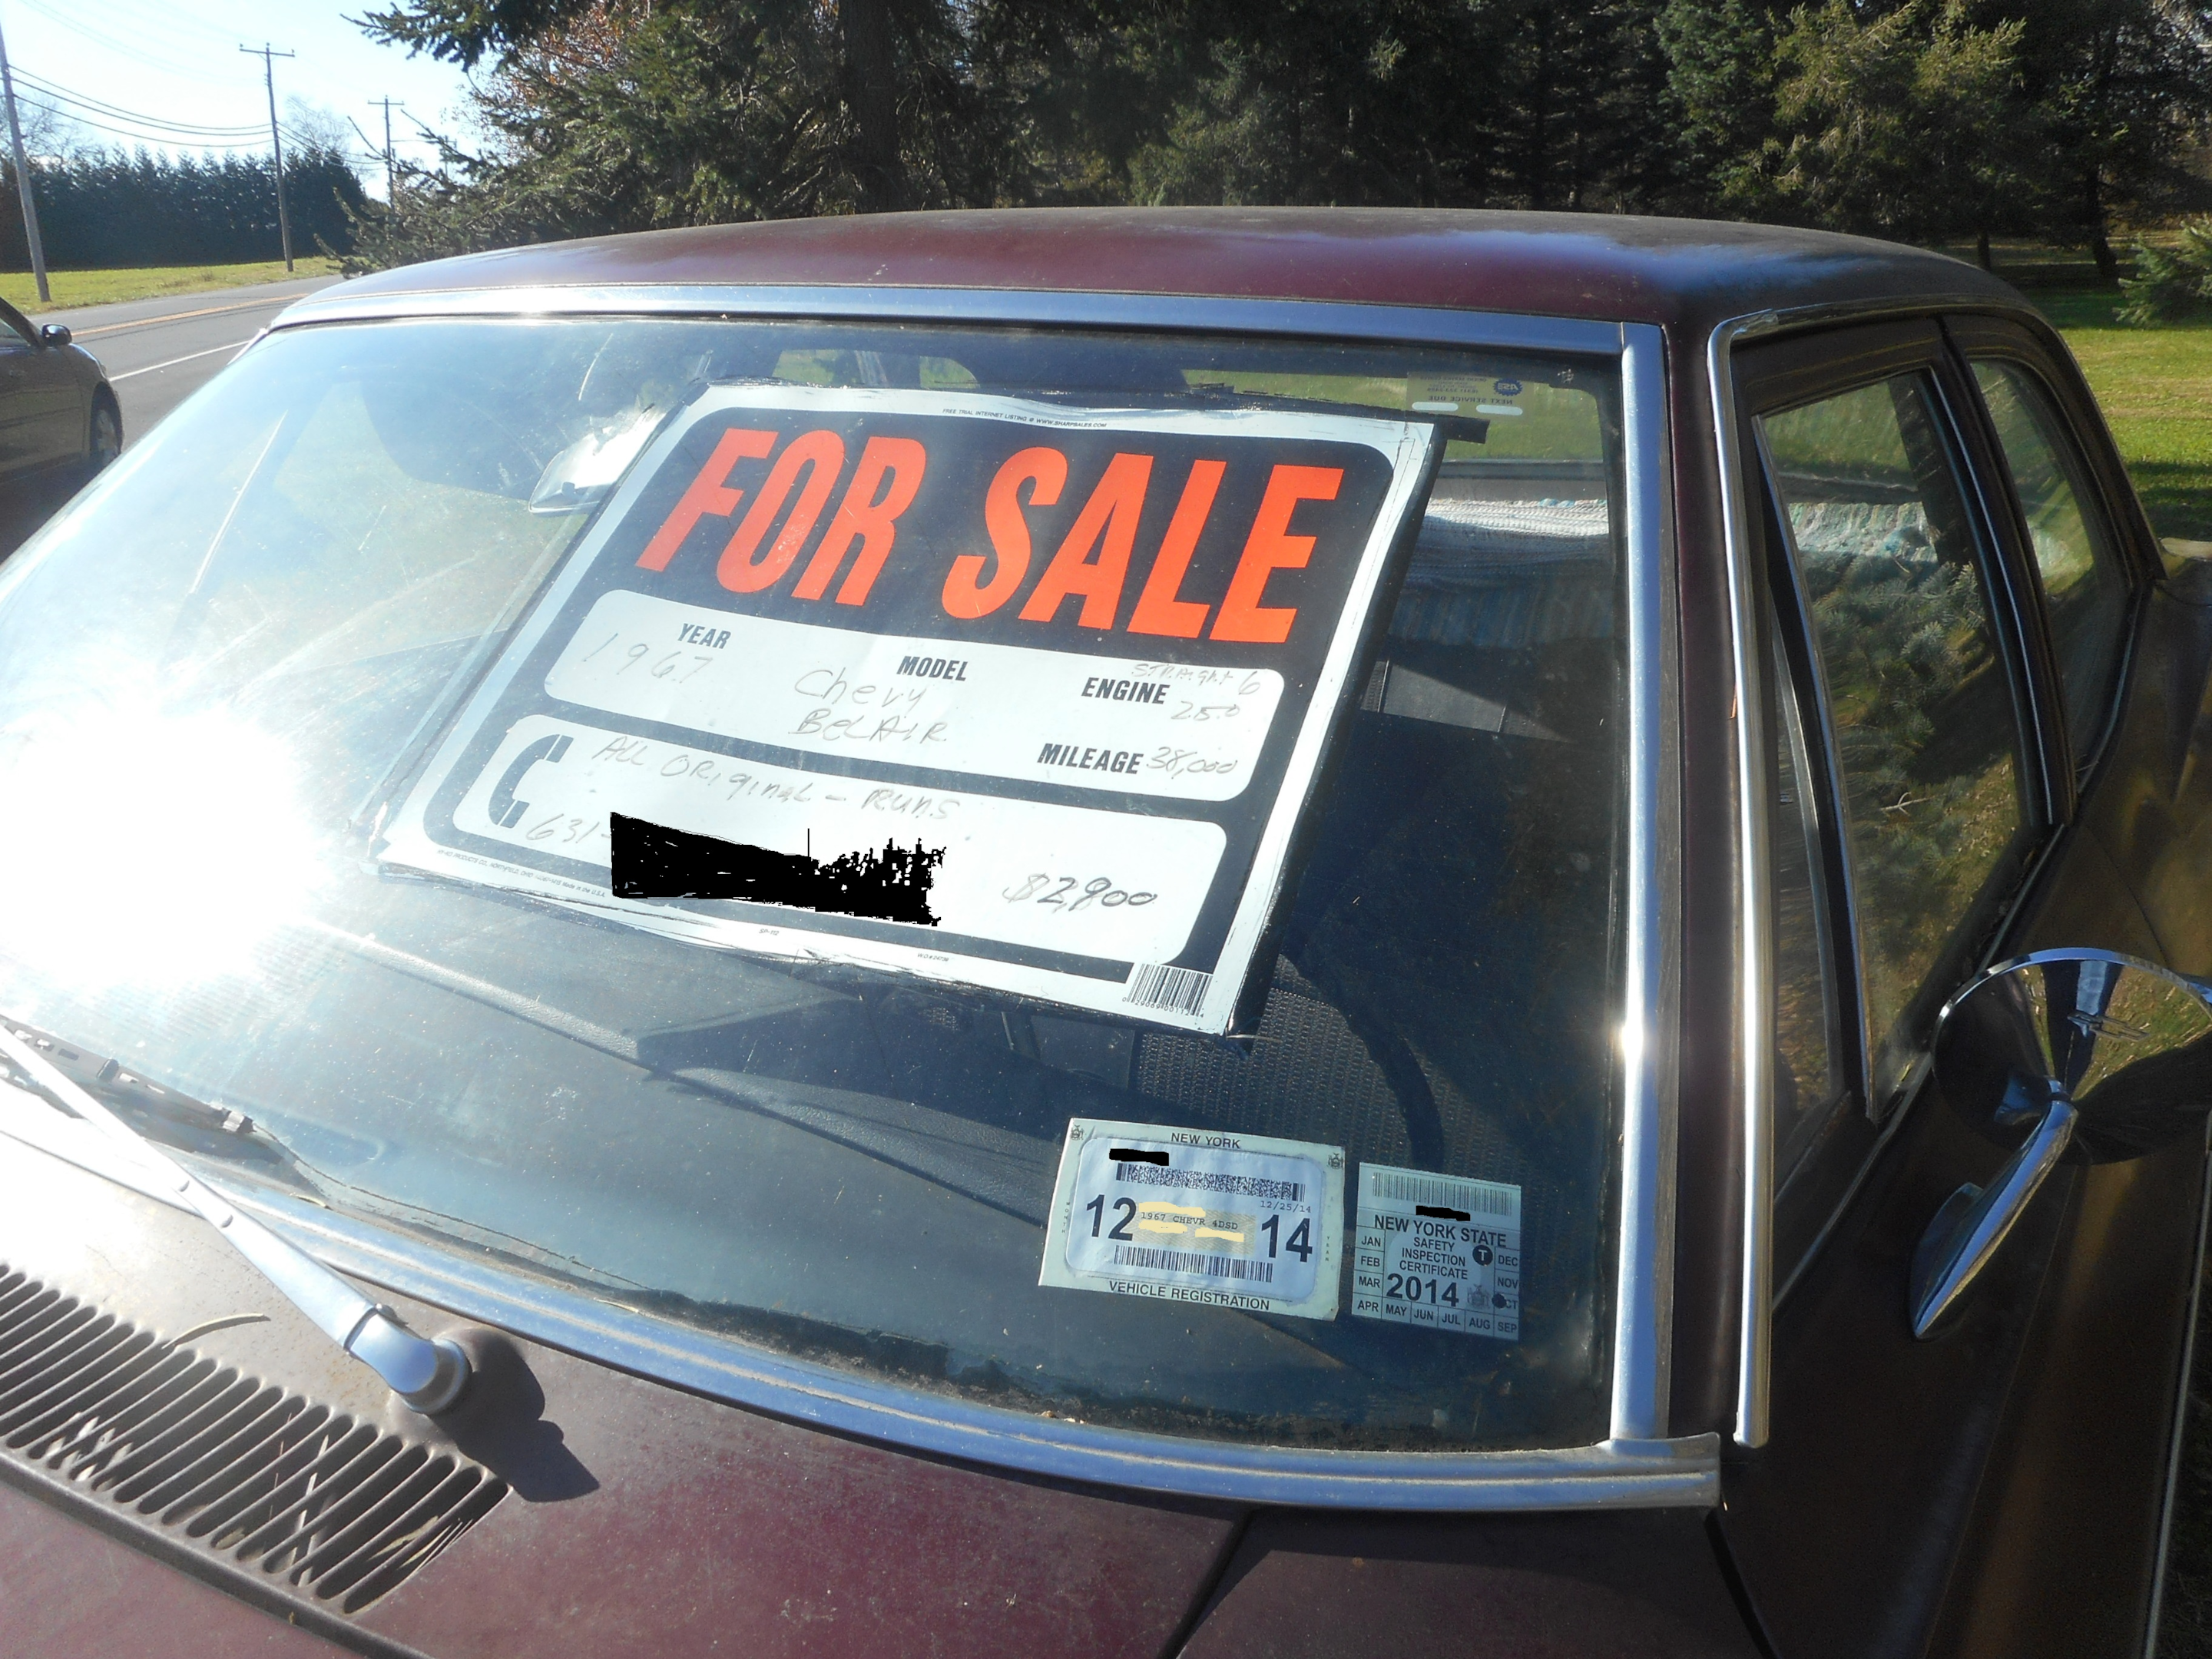 A car with a "For Sale" sign, representing evaluating your junk car's worth